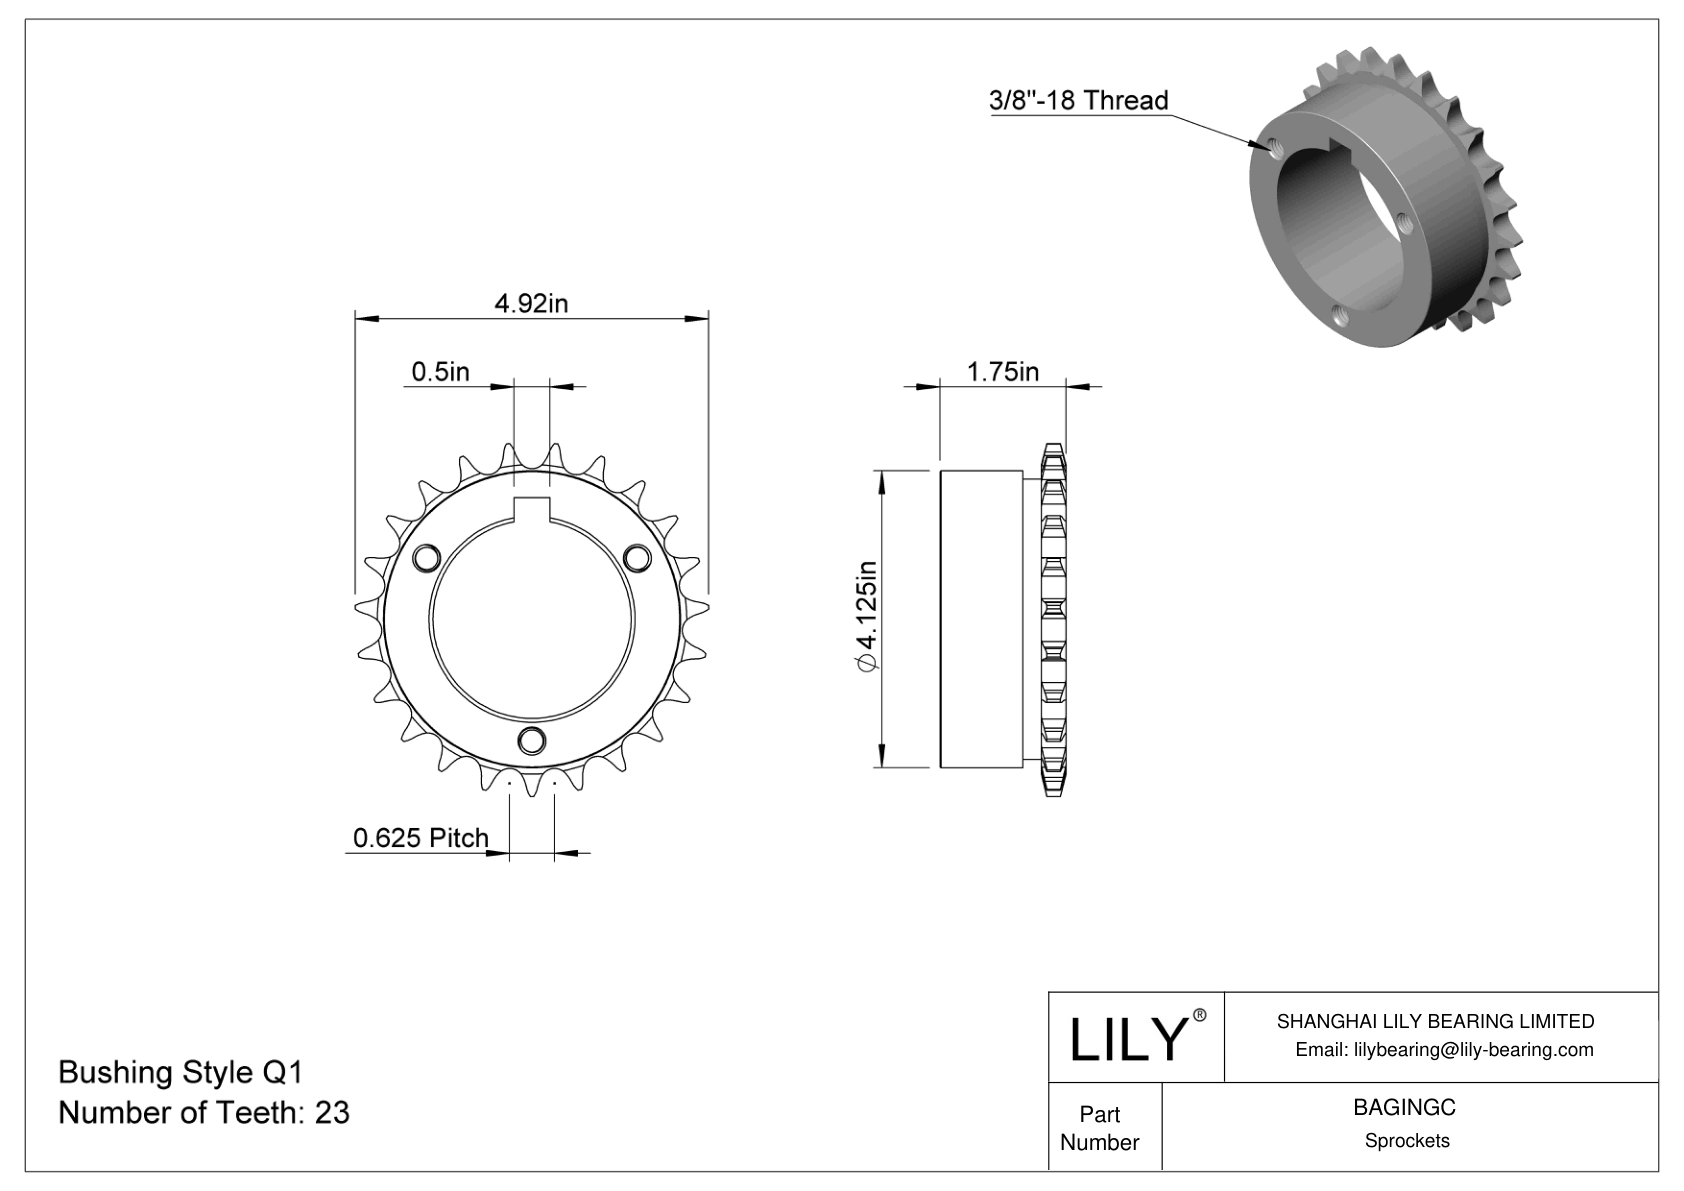 BAGINGC Split-Tapered Bushing-Bore Sprockets for ANSI Roller Chain cad drawing